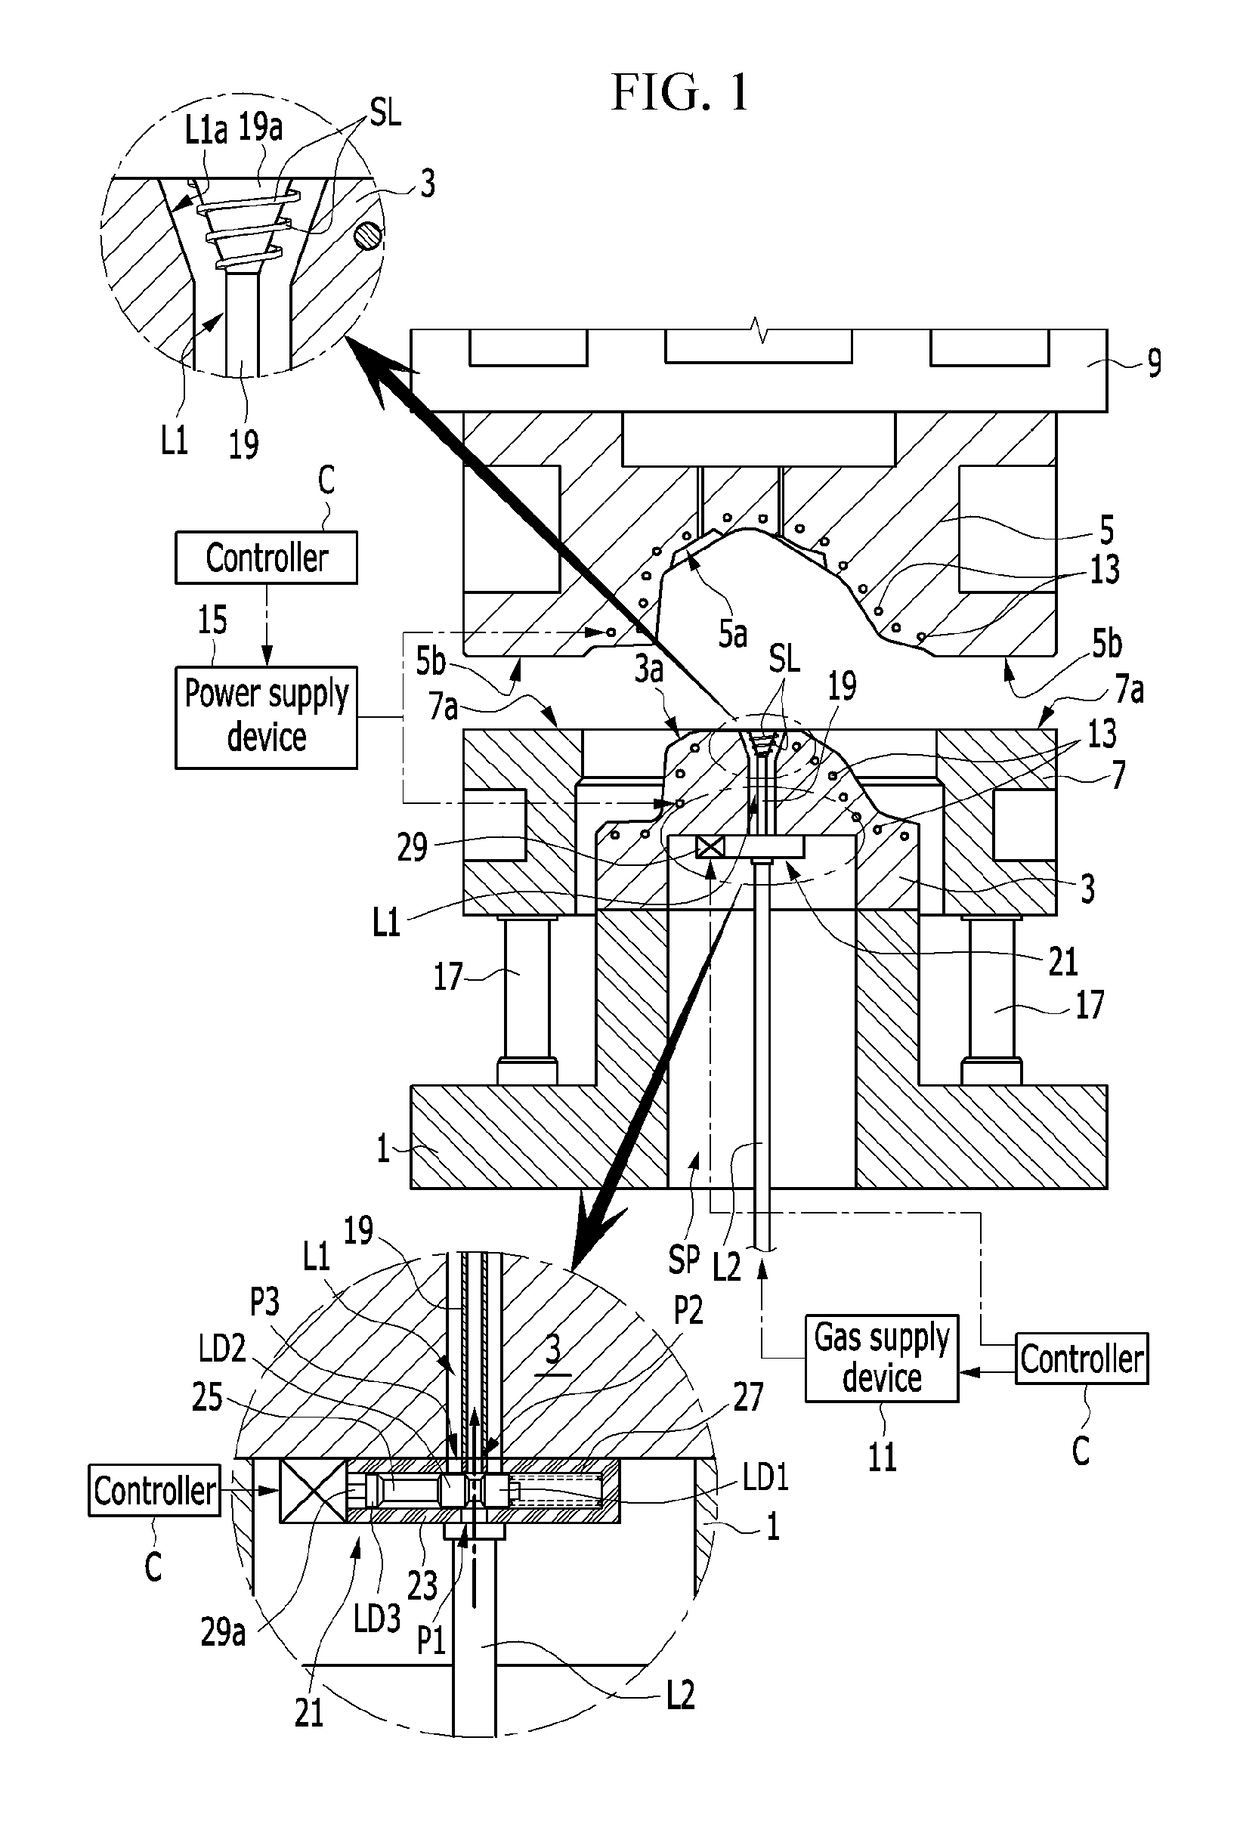 Multi-forming device